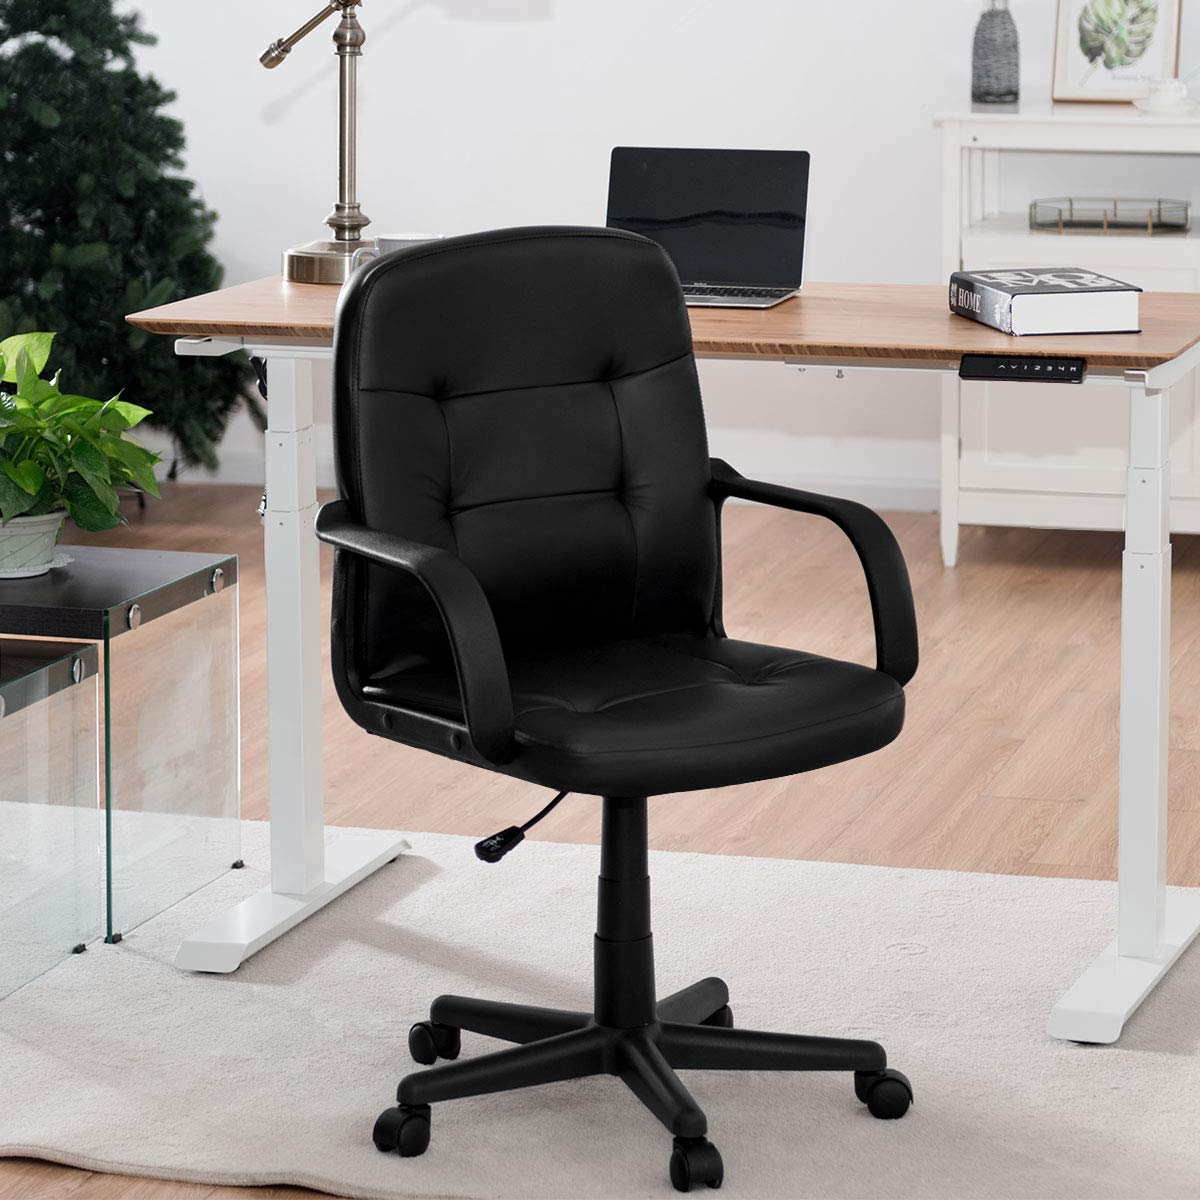 Giantex Ergonomic Office Chair Black Mid-Back Leather Computer Desk Chair with Arms